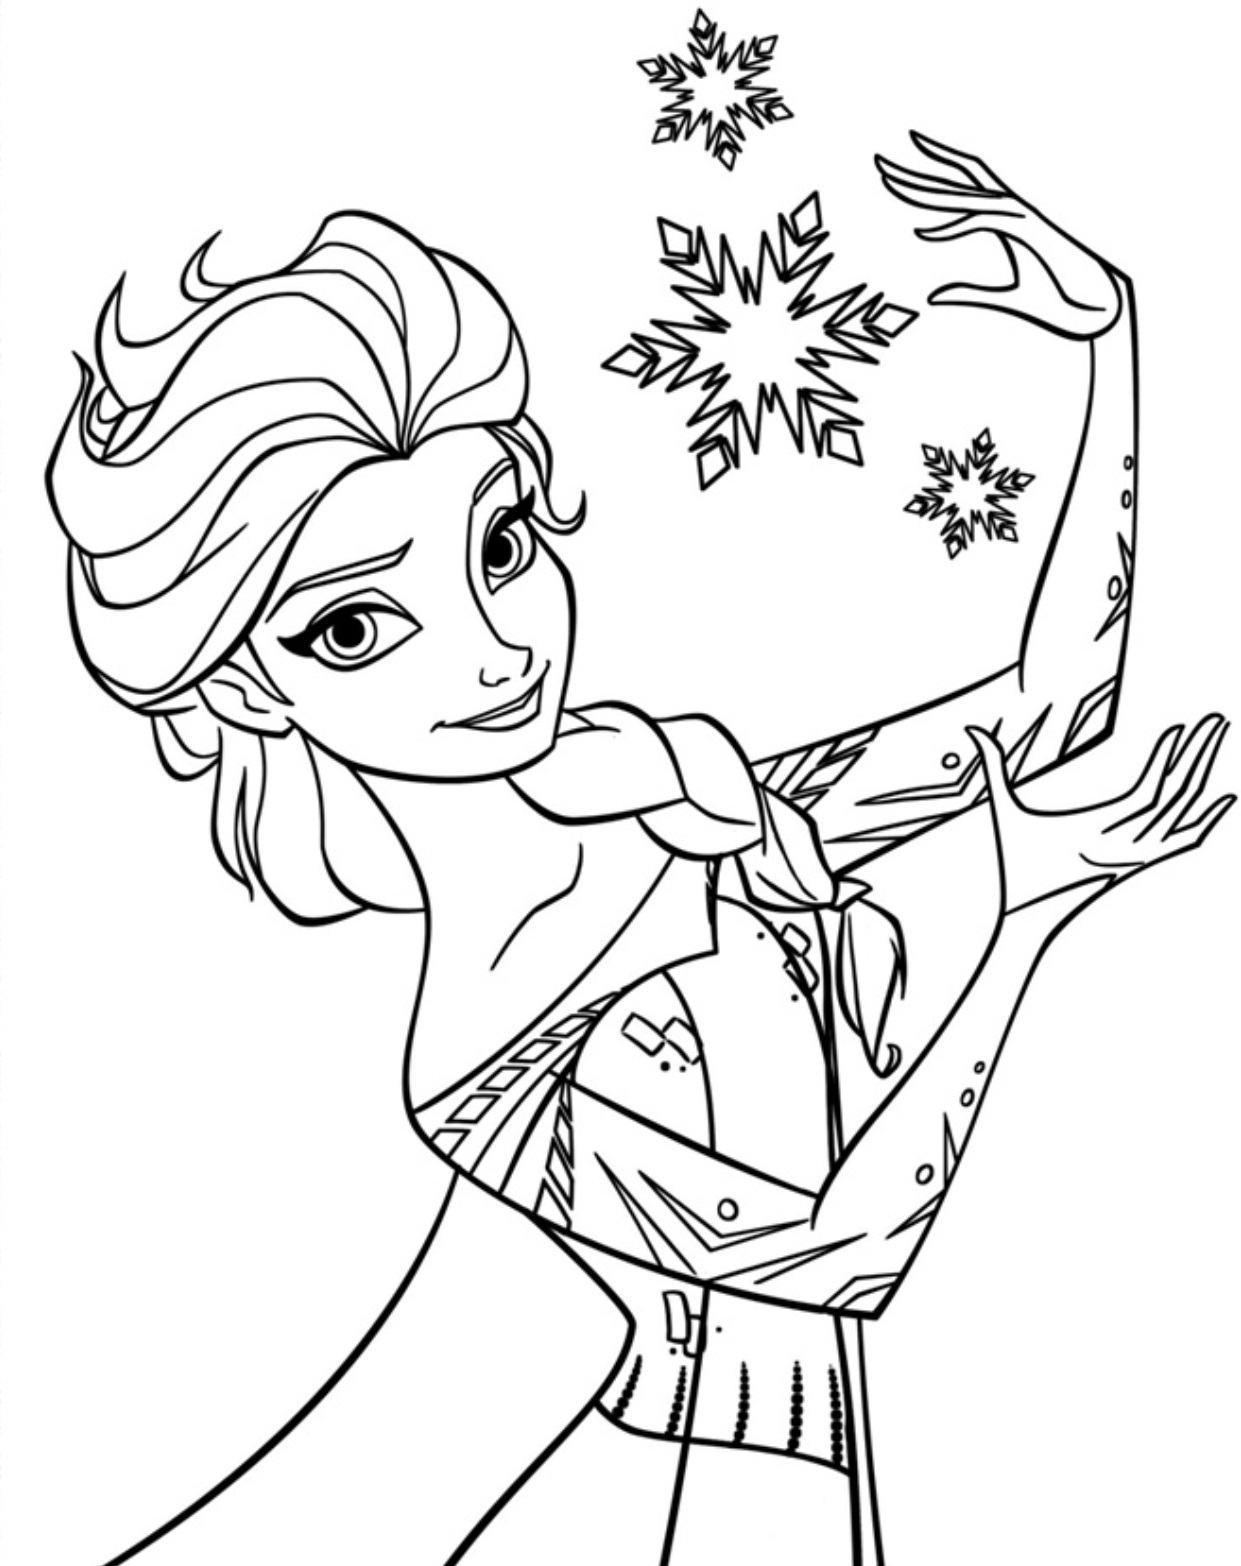 Download Free Printable Elsa Coloring Pages for Kids - Best ...